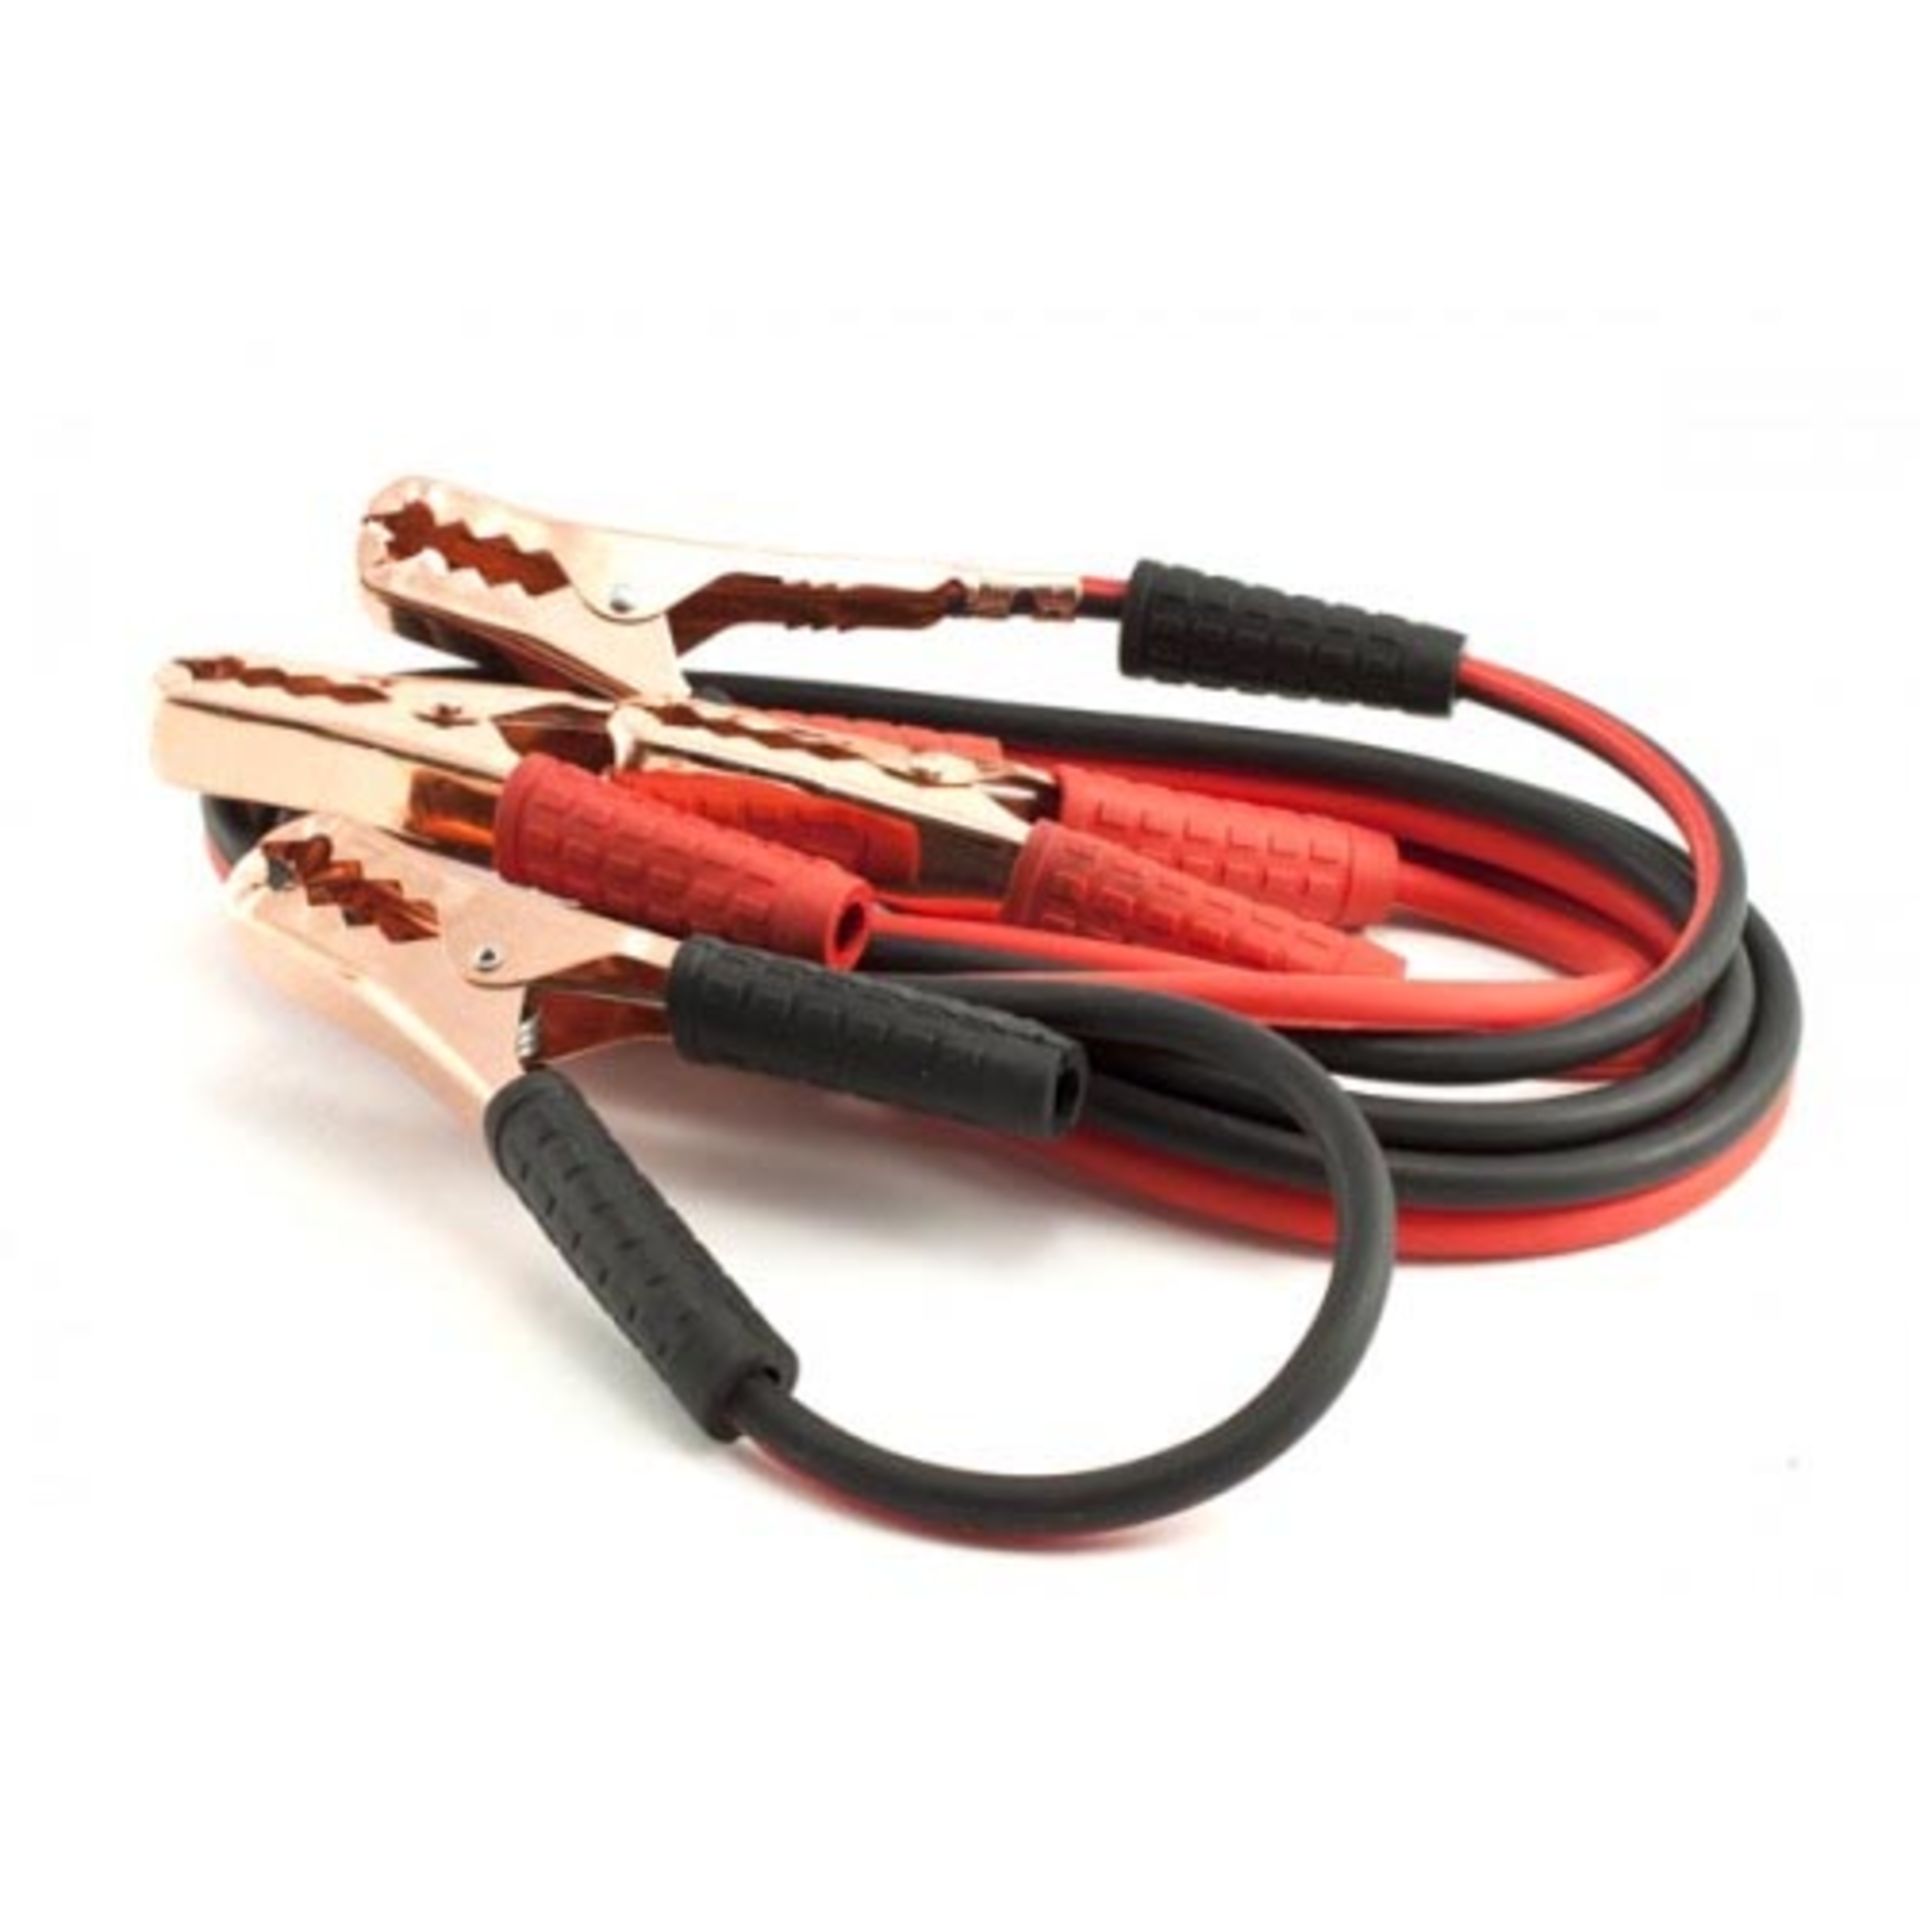 V *TRADE QTY* Brand New 200AMP Booster Cables X 4 YOUR BID PRICE TO BE MULTIPLIED BY FOUR